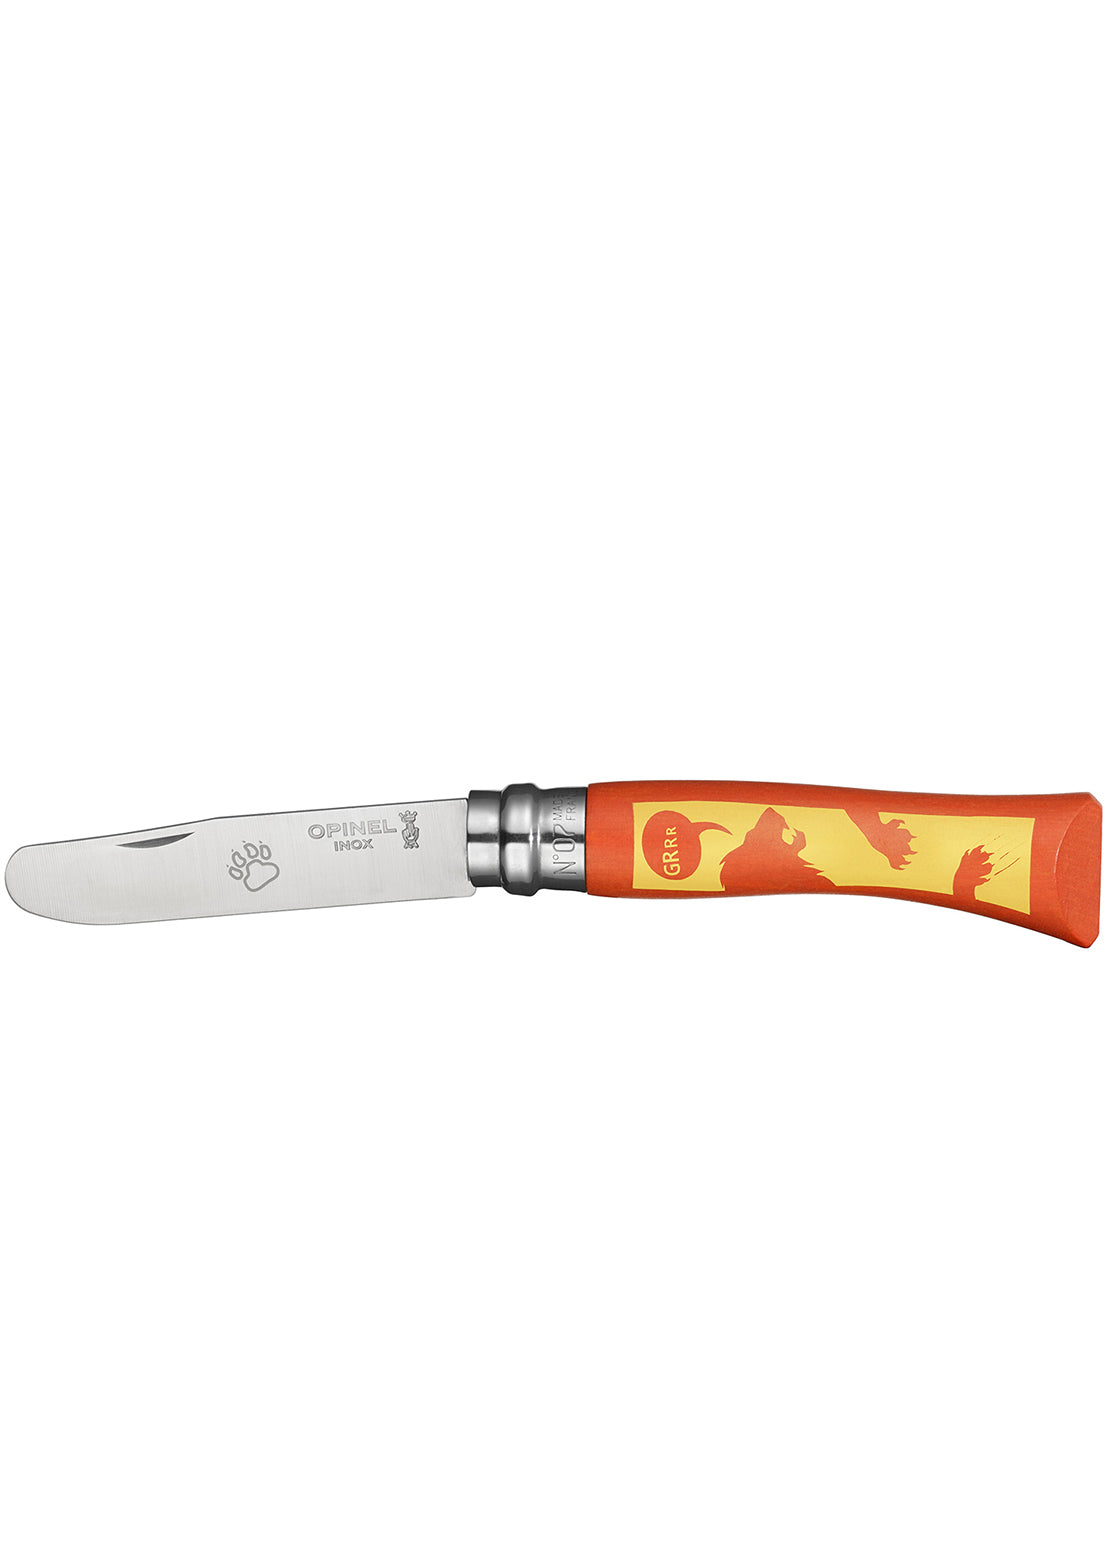 Opinel Junior N°07 My First Animopinel Round Ended Knife Lion/Orange